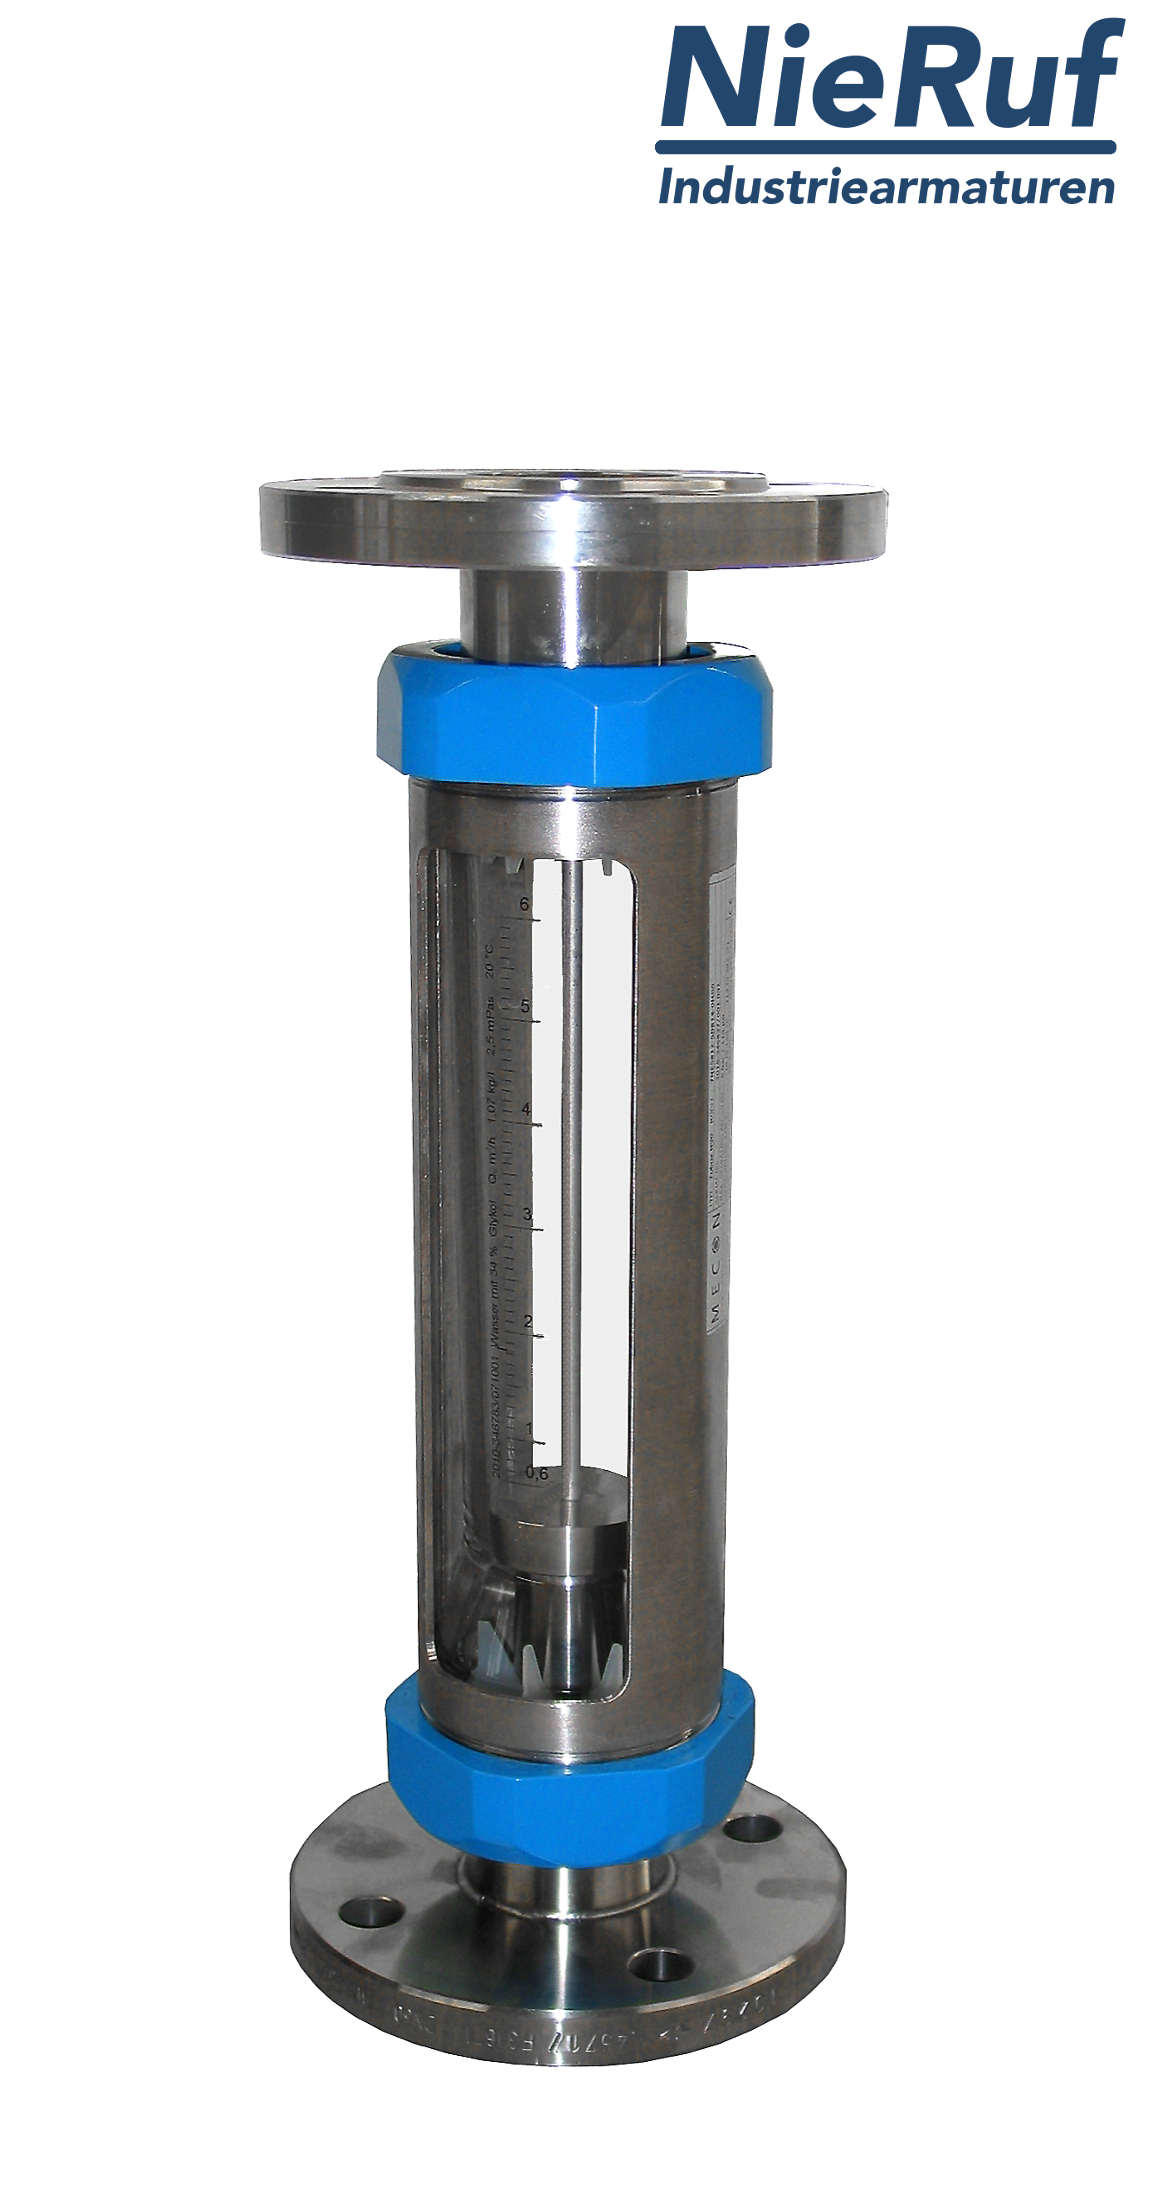 Variable area flowmeter stainless steel + borosilicate flange DN50 4000.0 - 16000 l/h water FKM